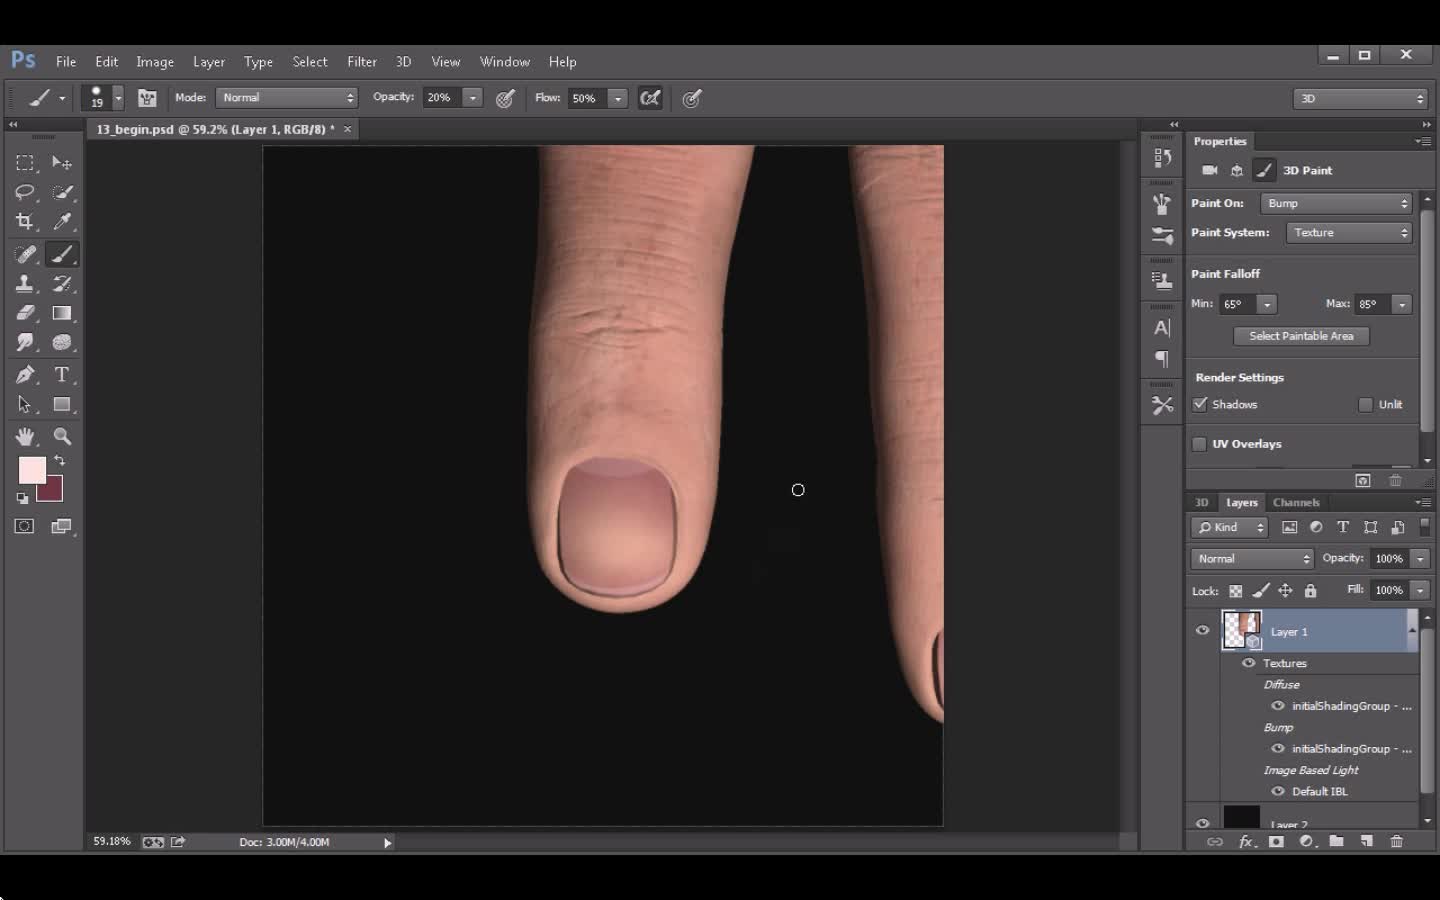 Eddie Russell - Painting Realistic 3D Skin Textures in Photoshop: Hands